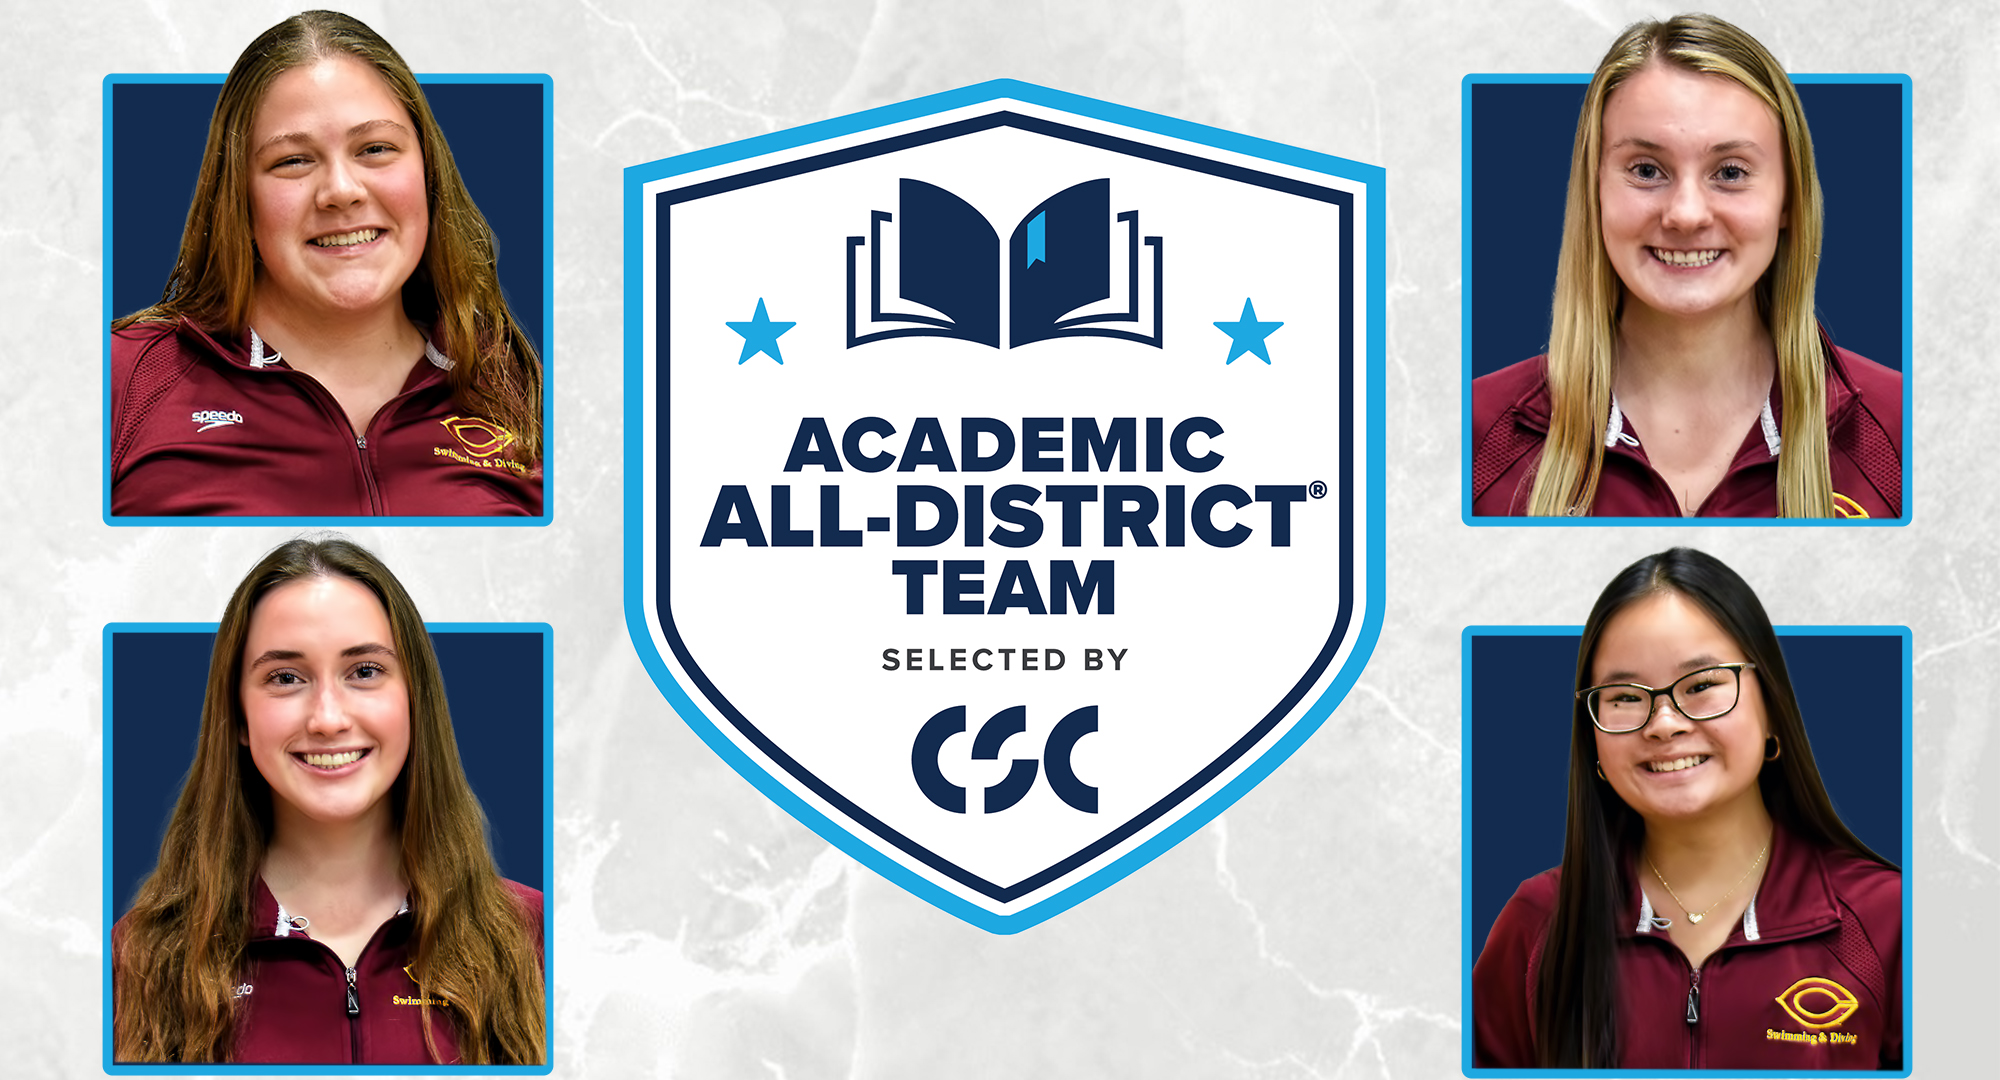 Rachel Andersen, Kiernan Darling, Hailey Jaeger and Christina Moore were all named to the CSC Academic All-District Team.